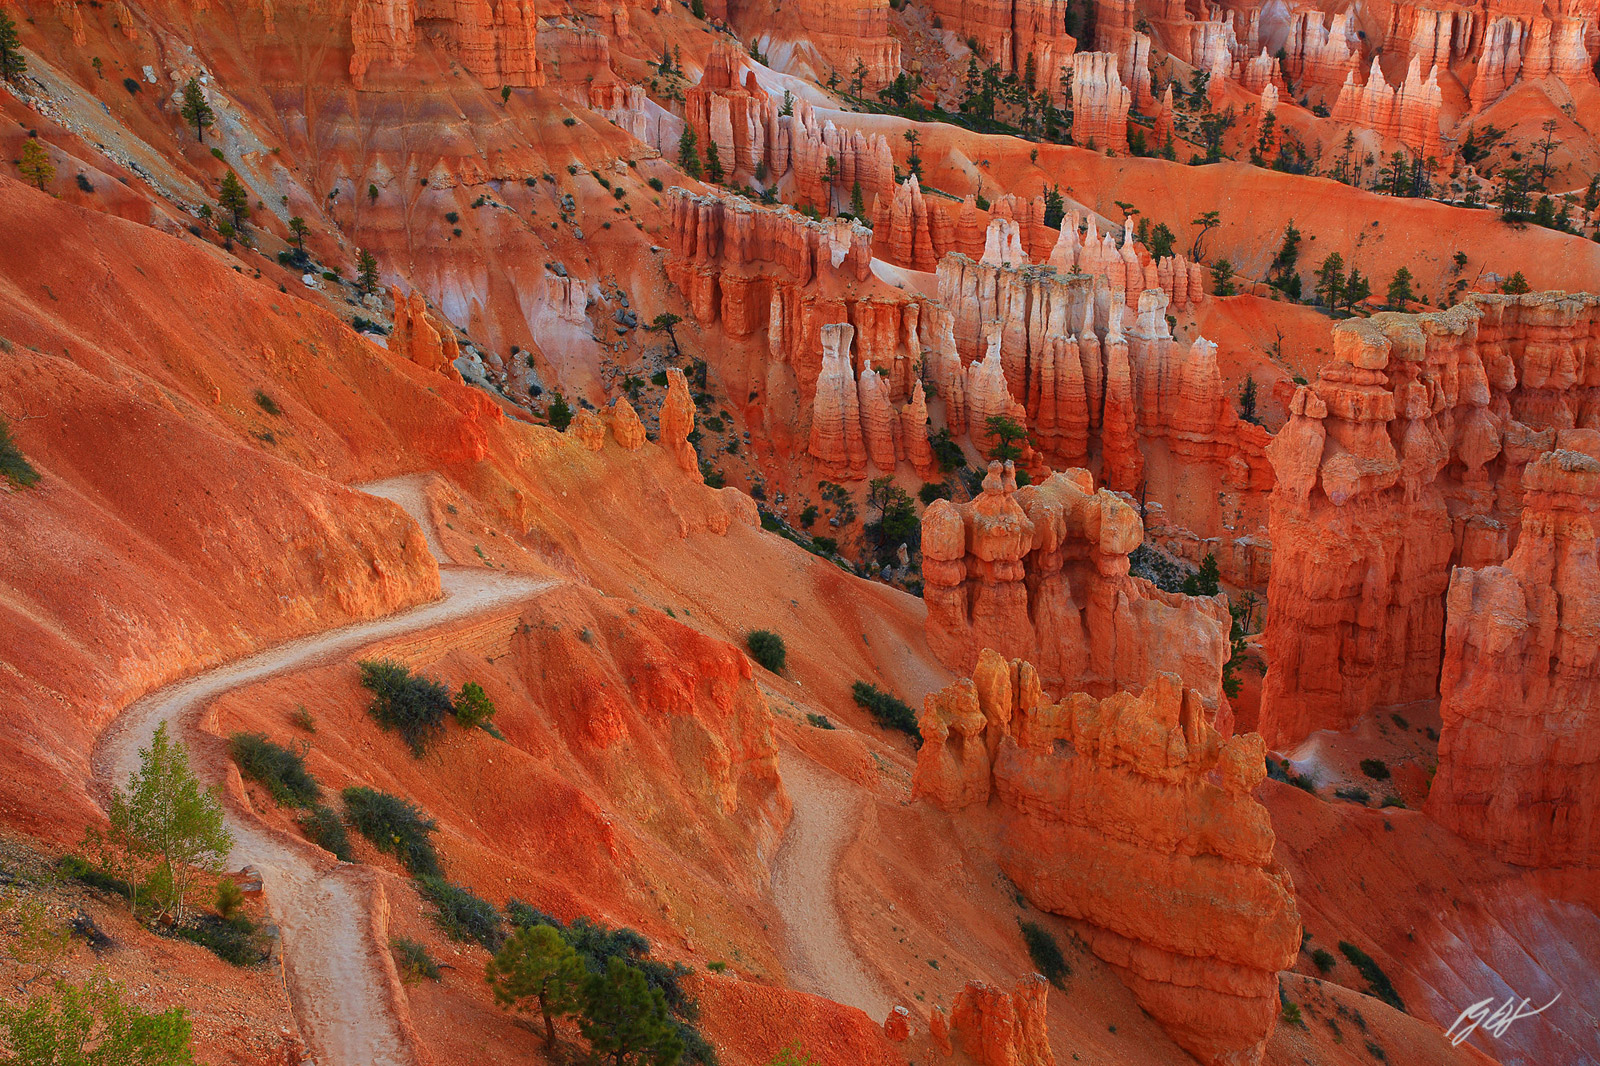 Hoodoos of Bryce Canyon from Inspiration Point in Bryce Canyon National Park in Utah